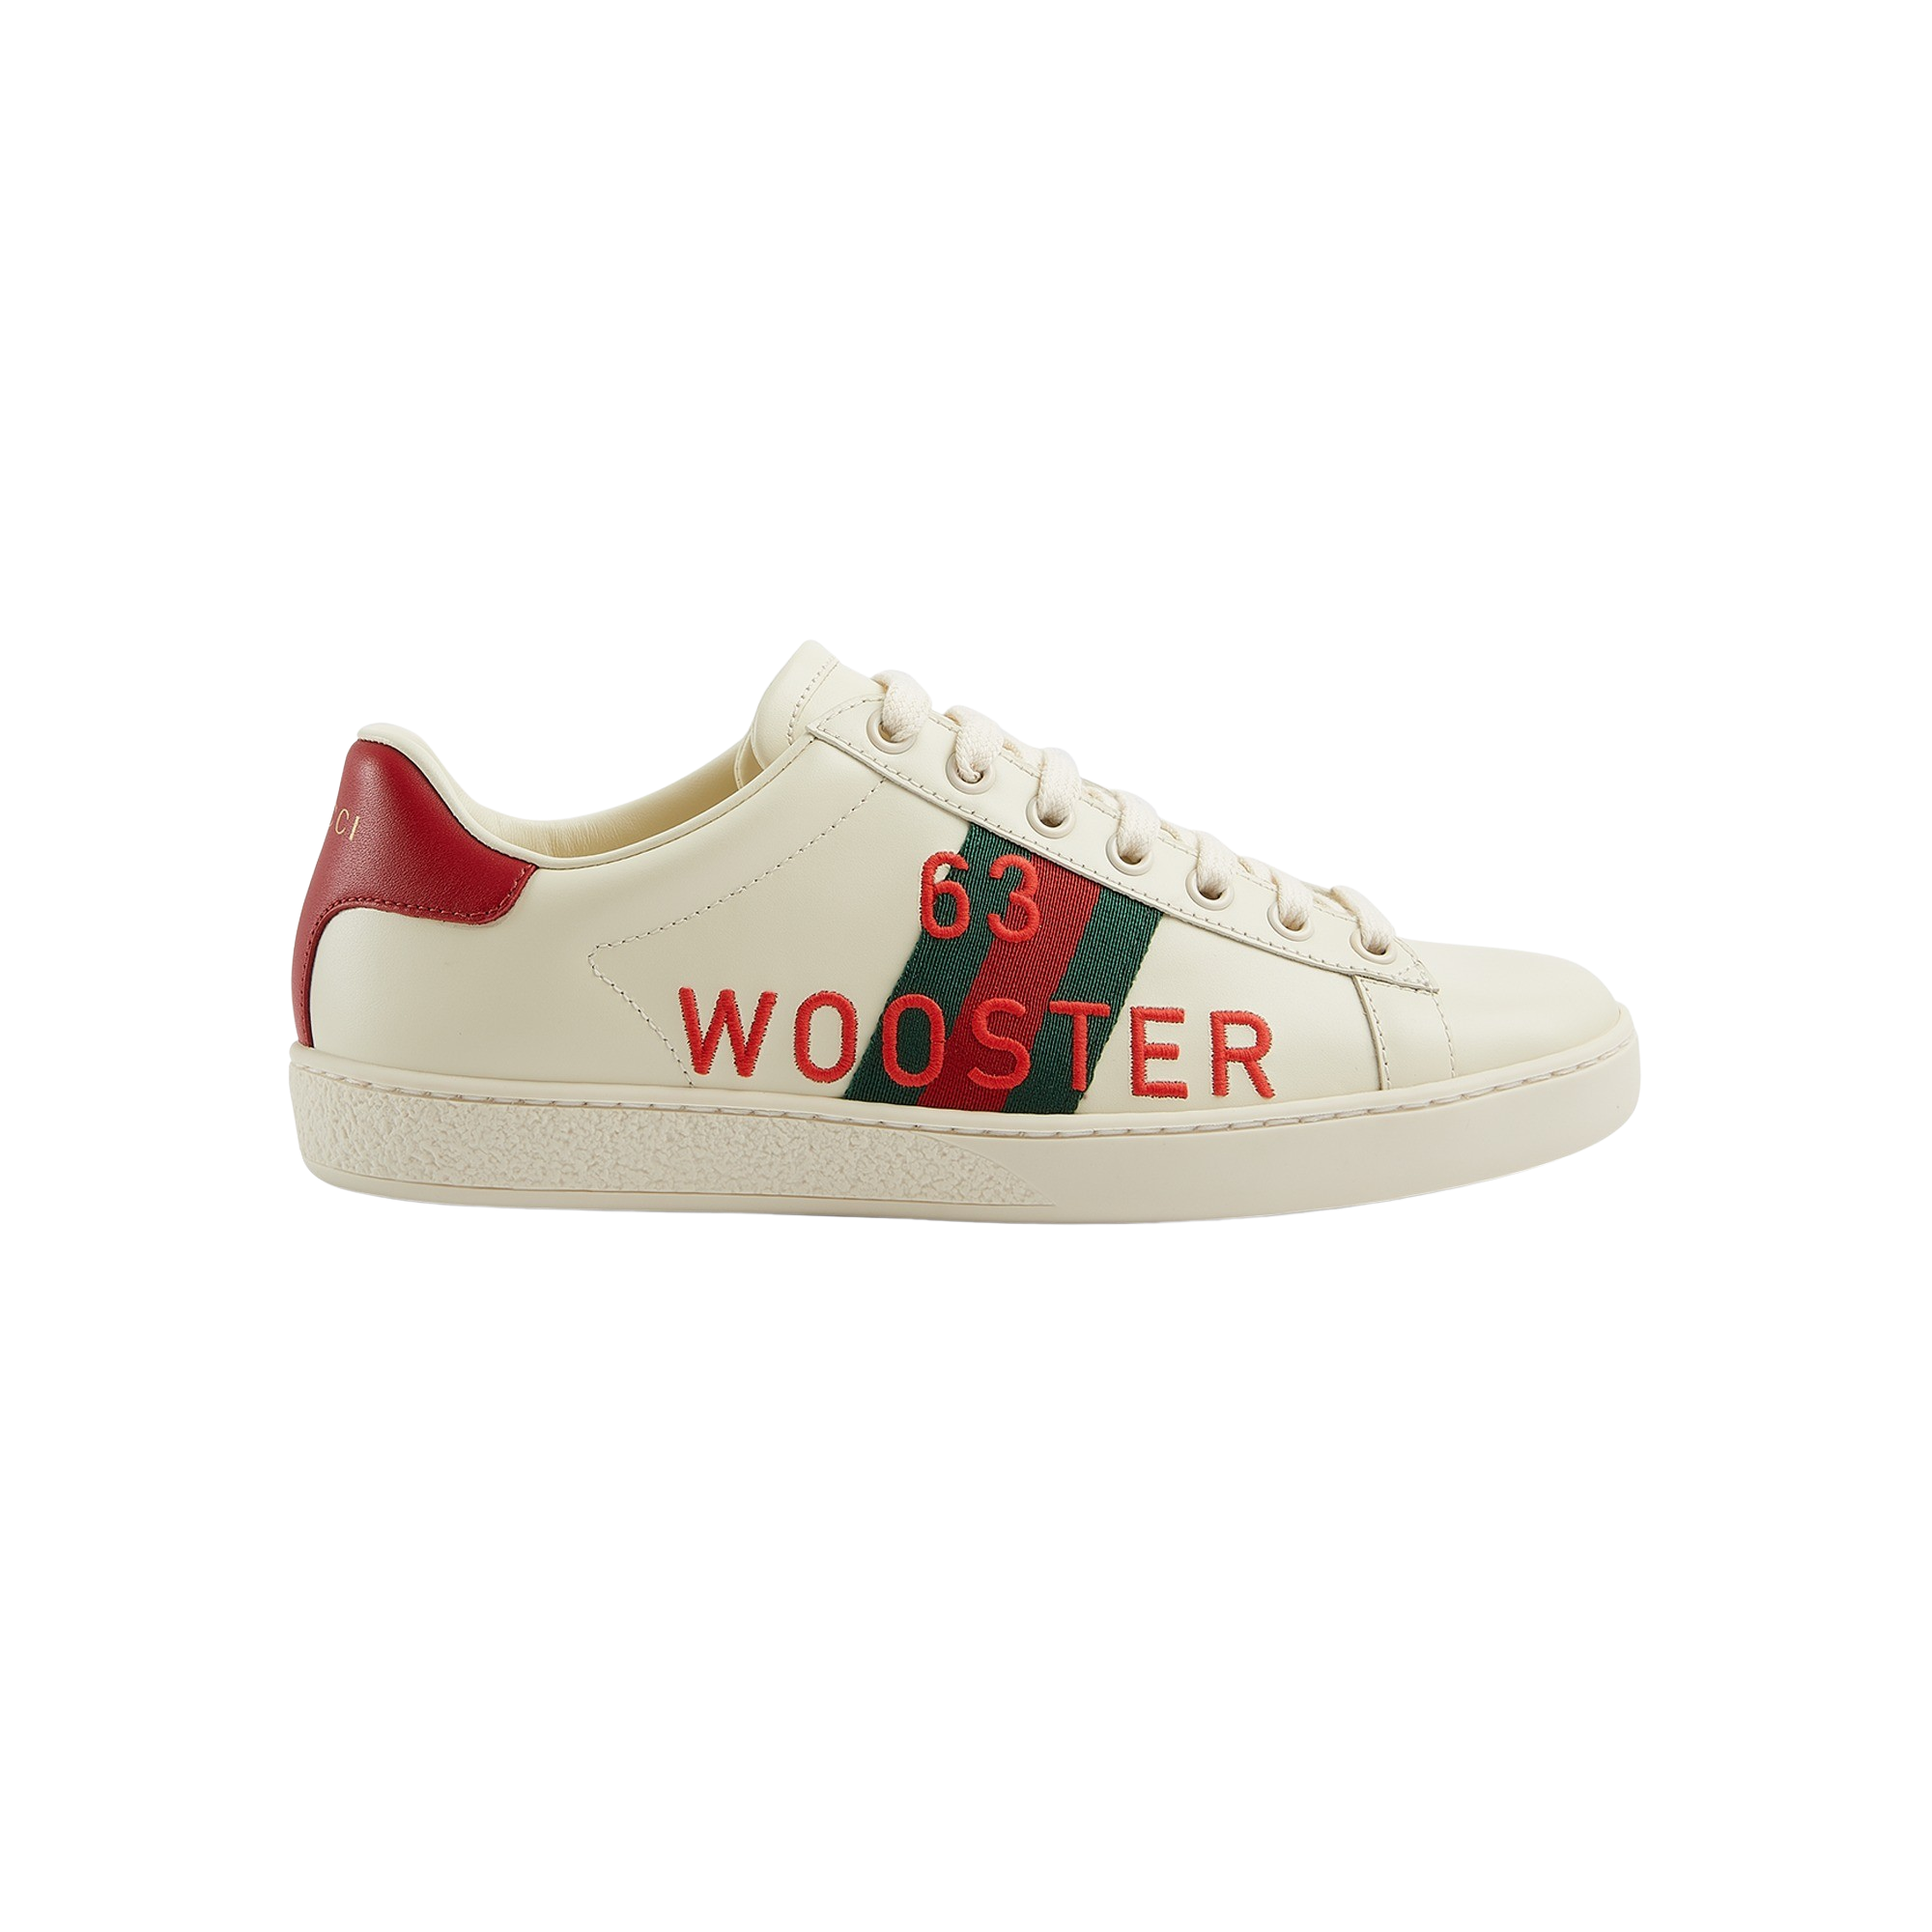 Gucci New Ace Wooster sneaker